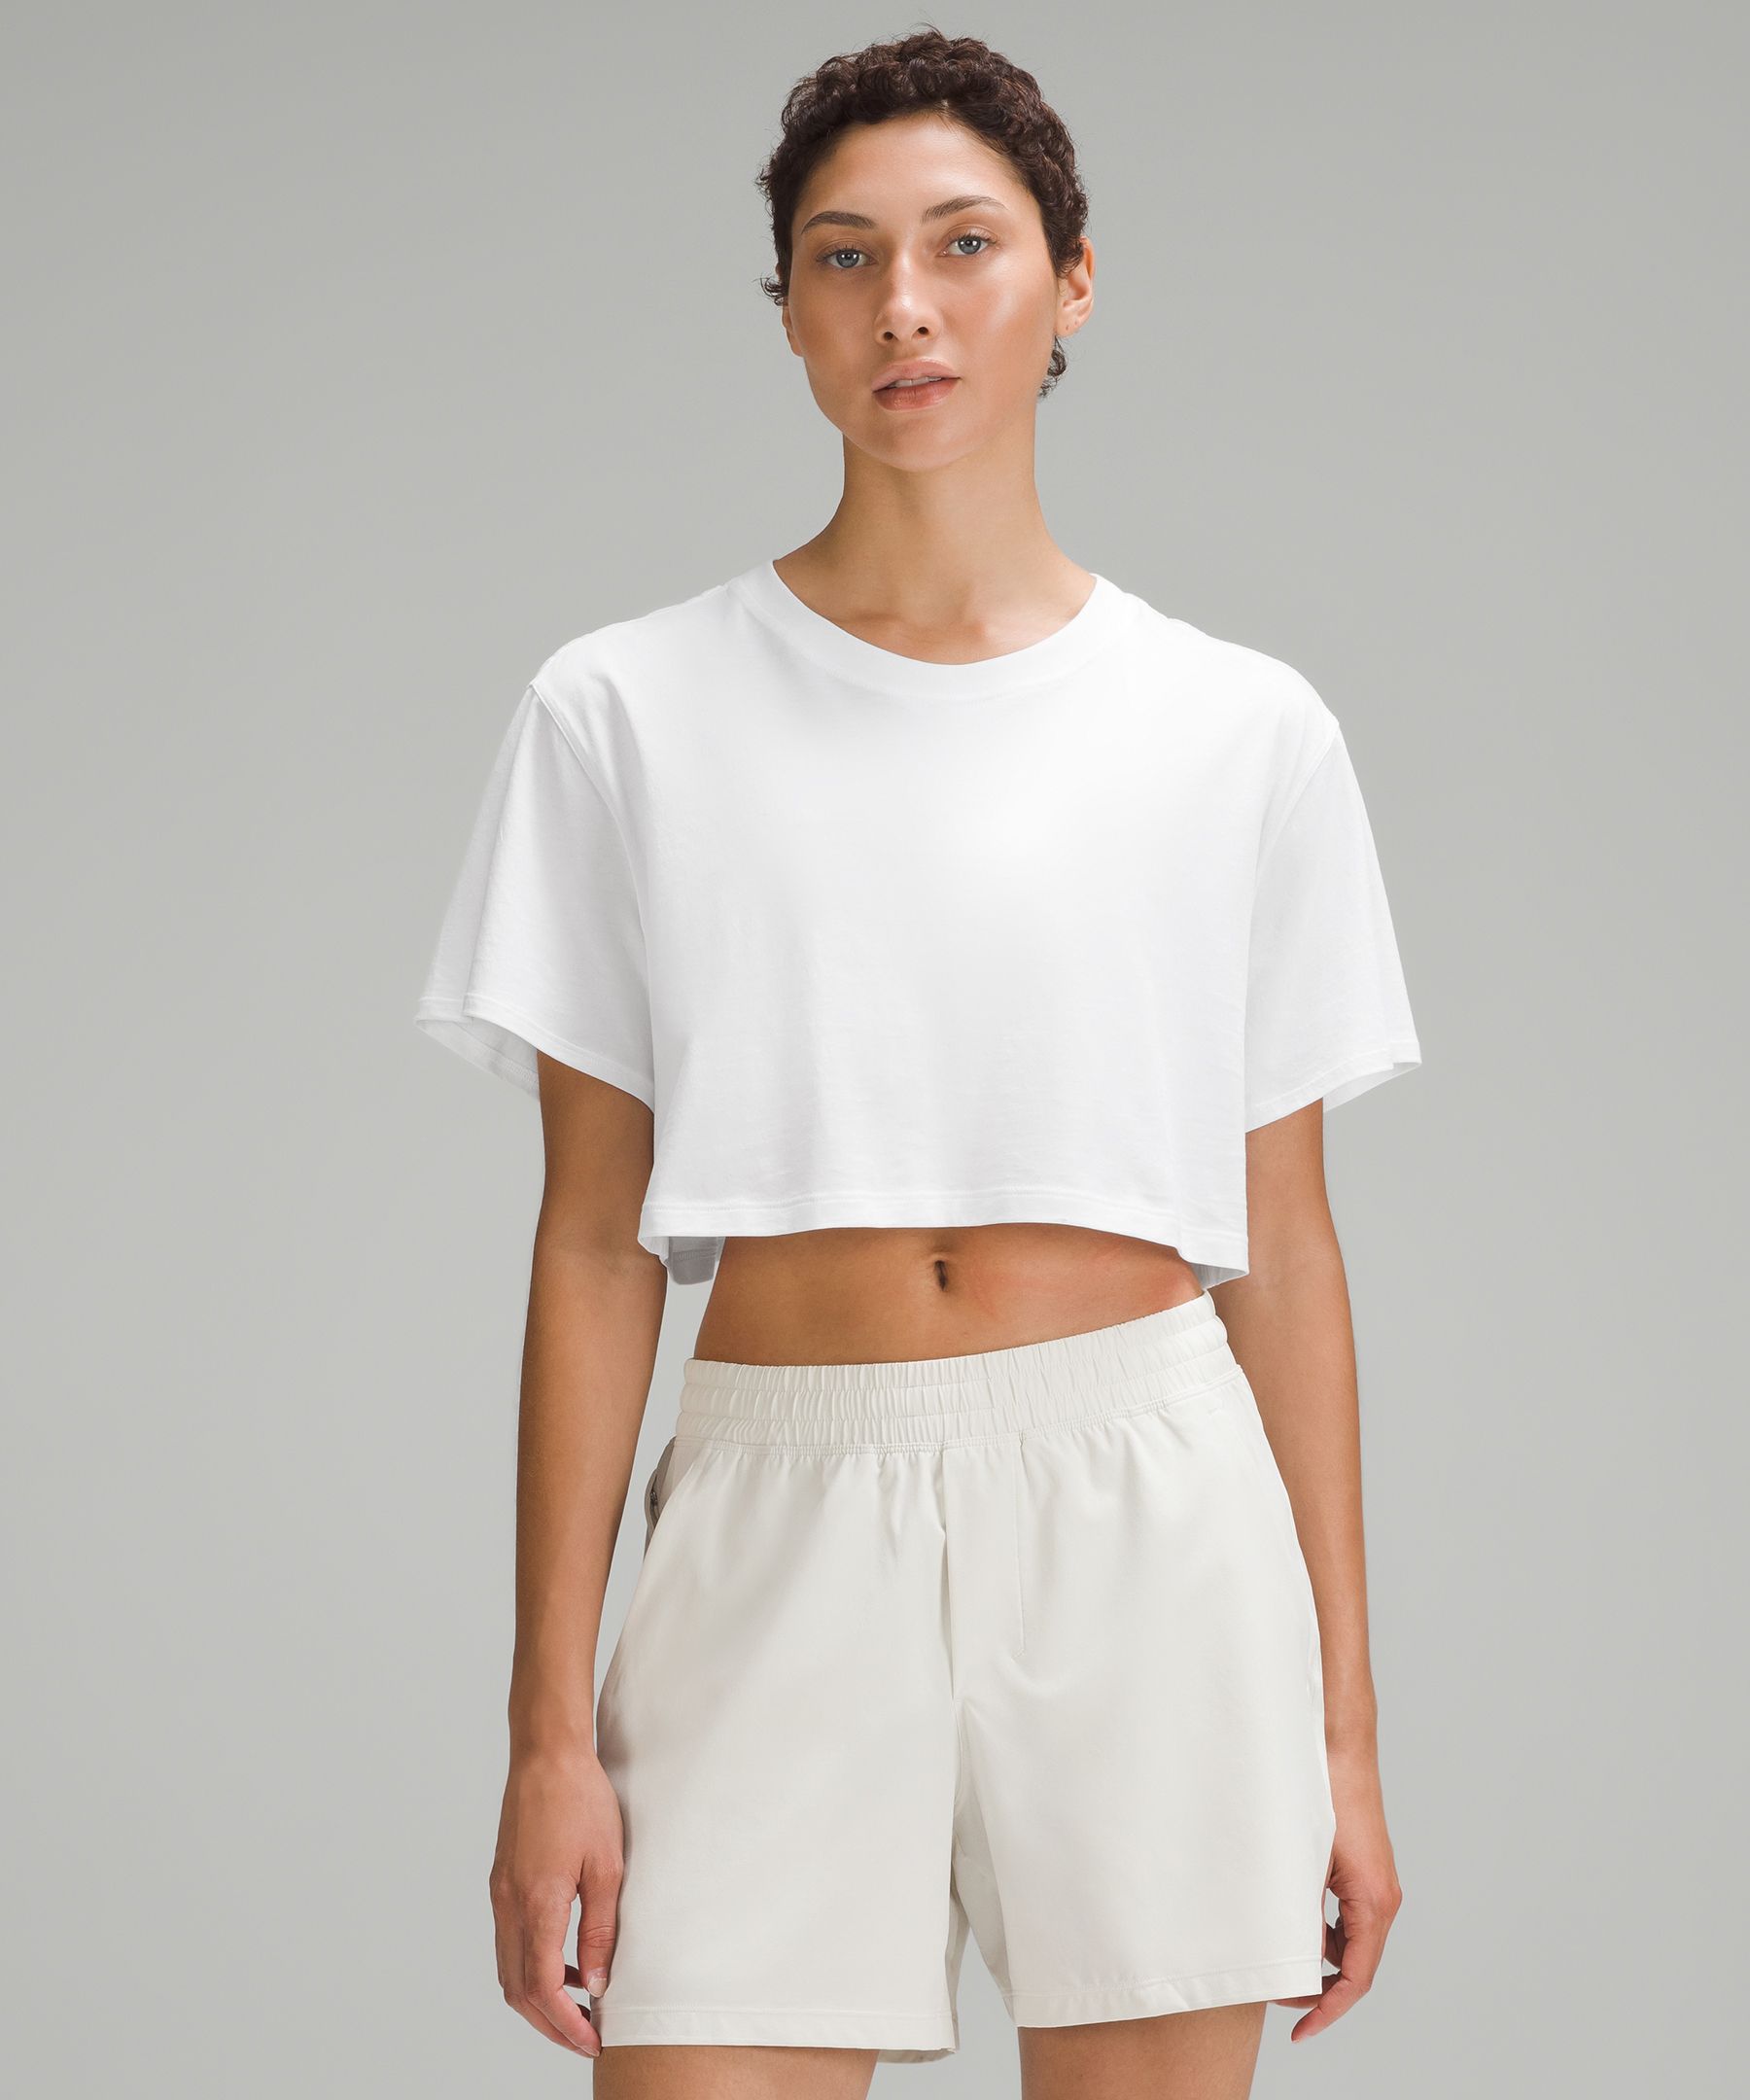 Loose Boxy White Short Sleeve Crop Top / Made in USA